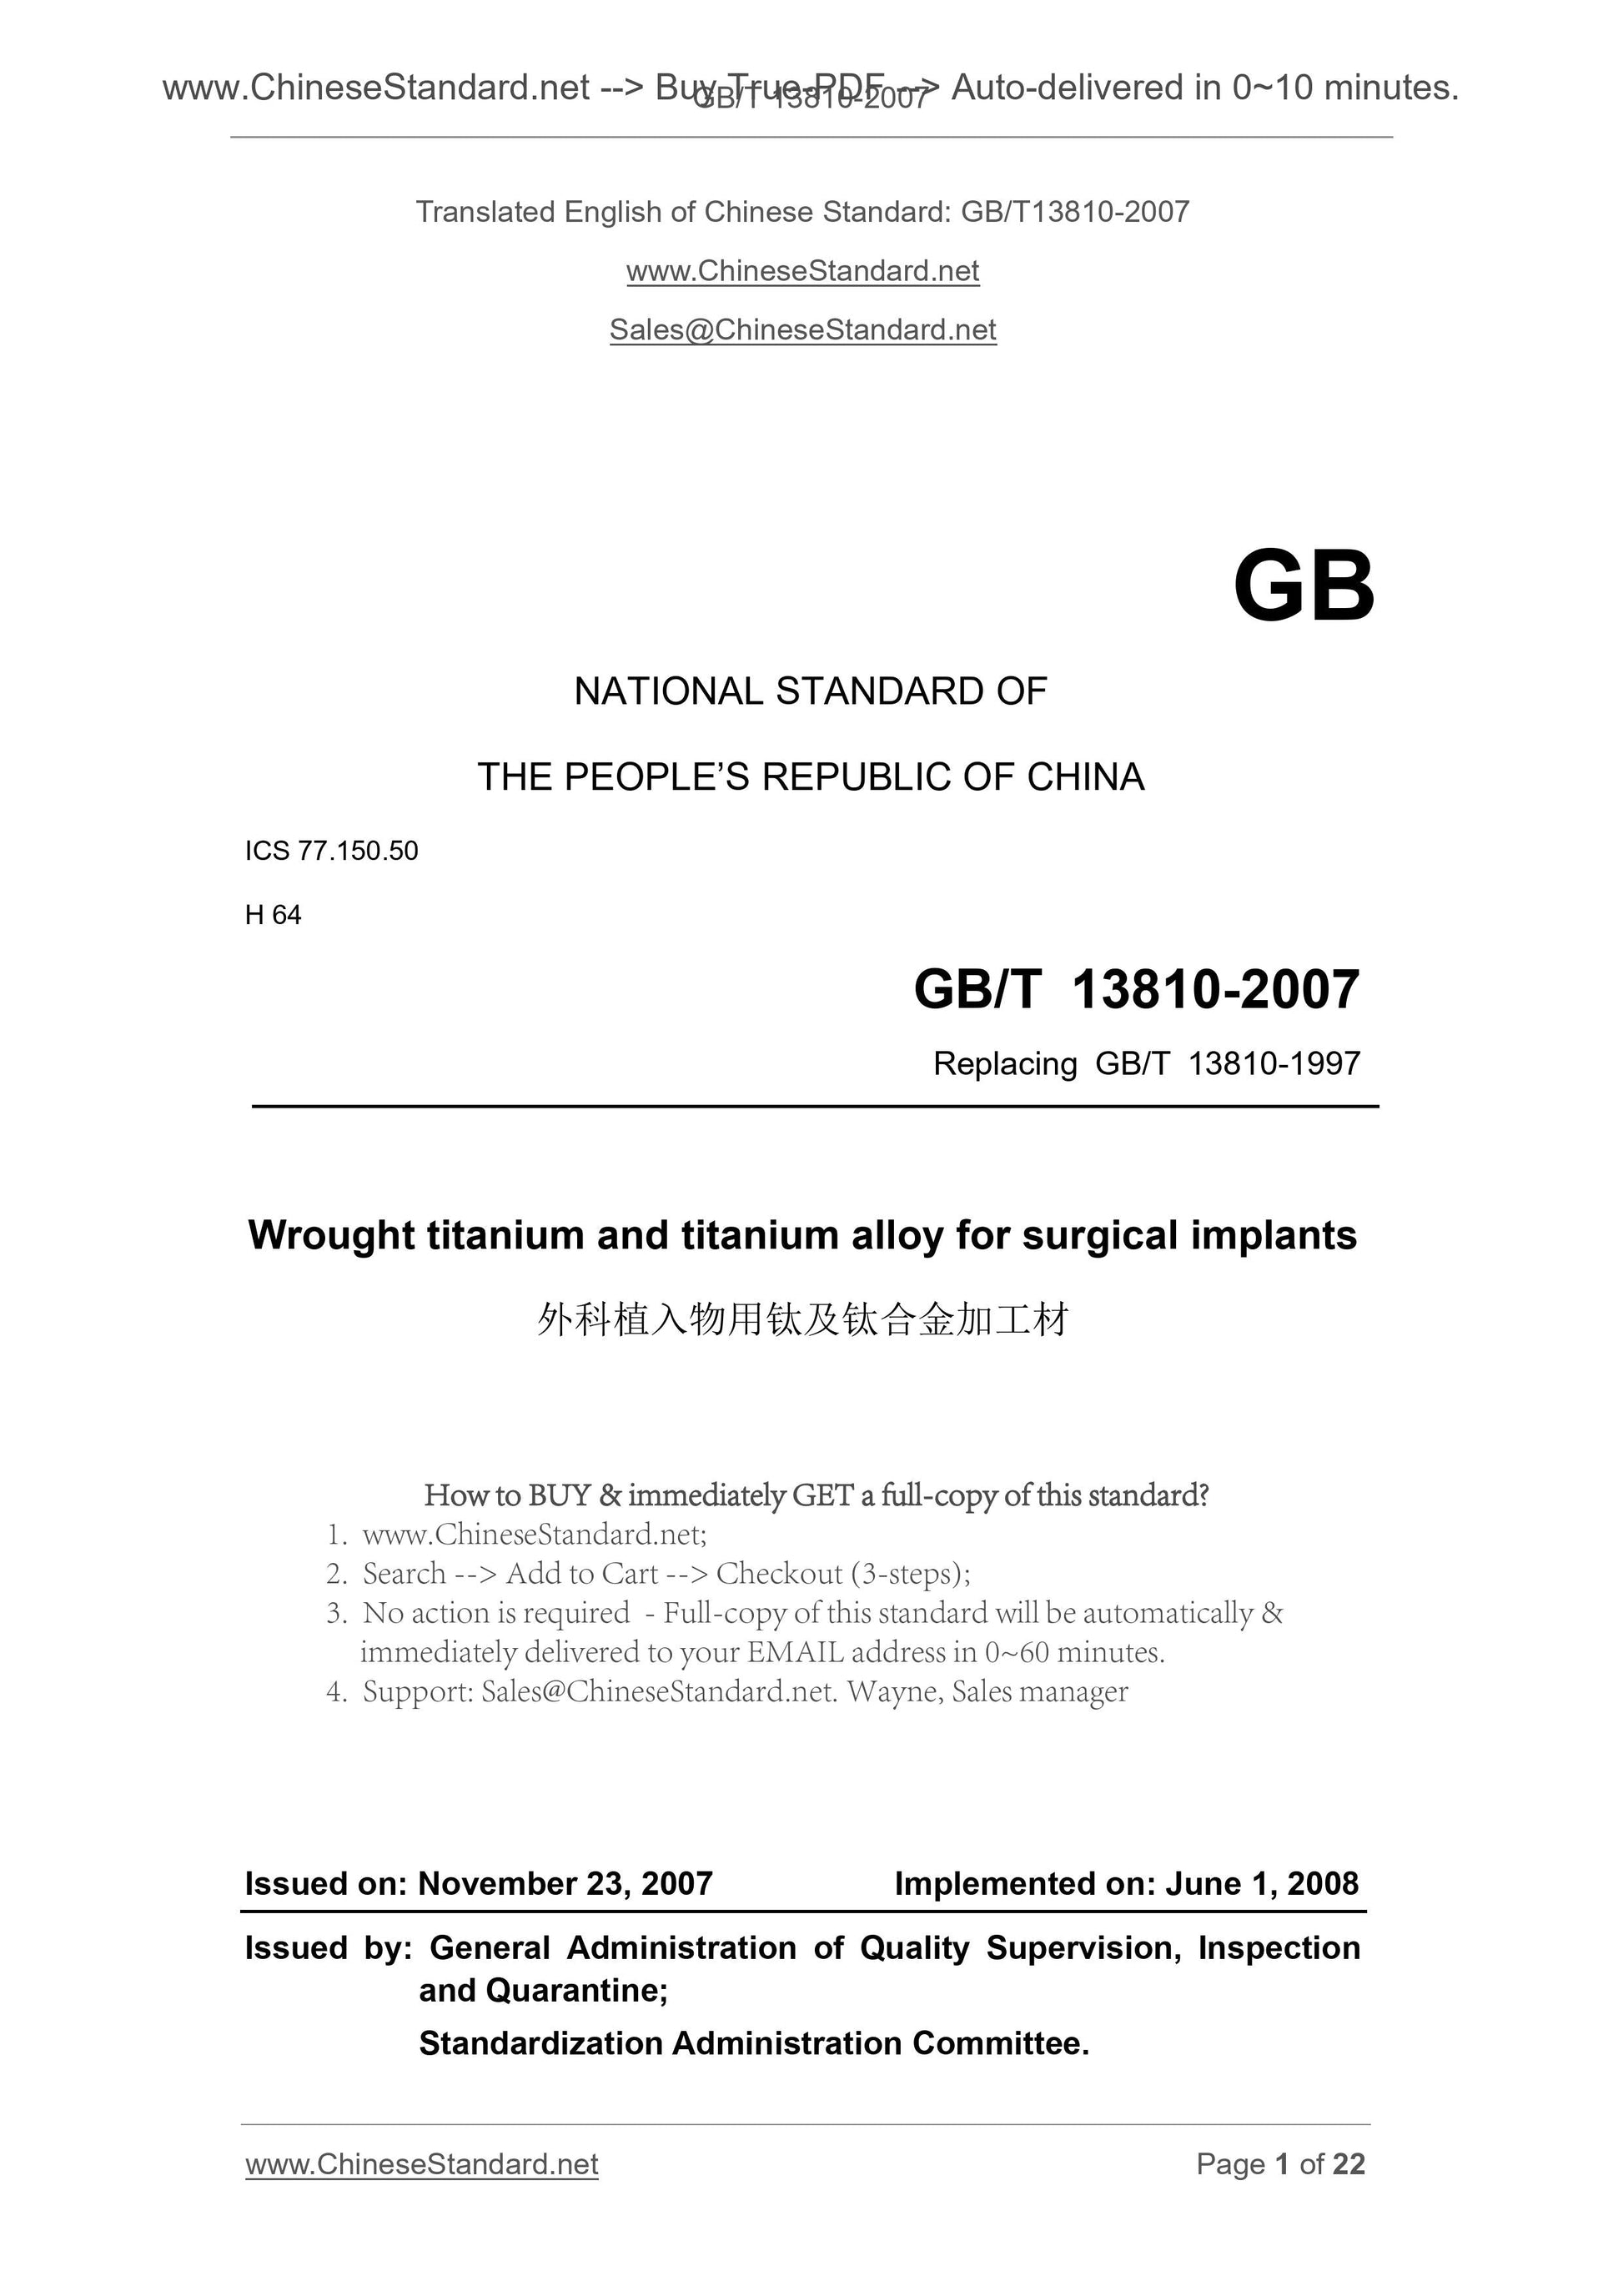 GB/T 13810-2007 Page 1